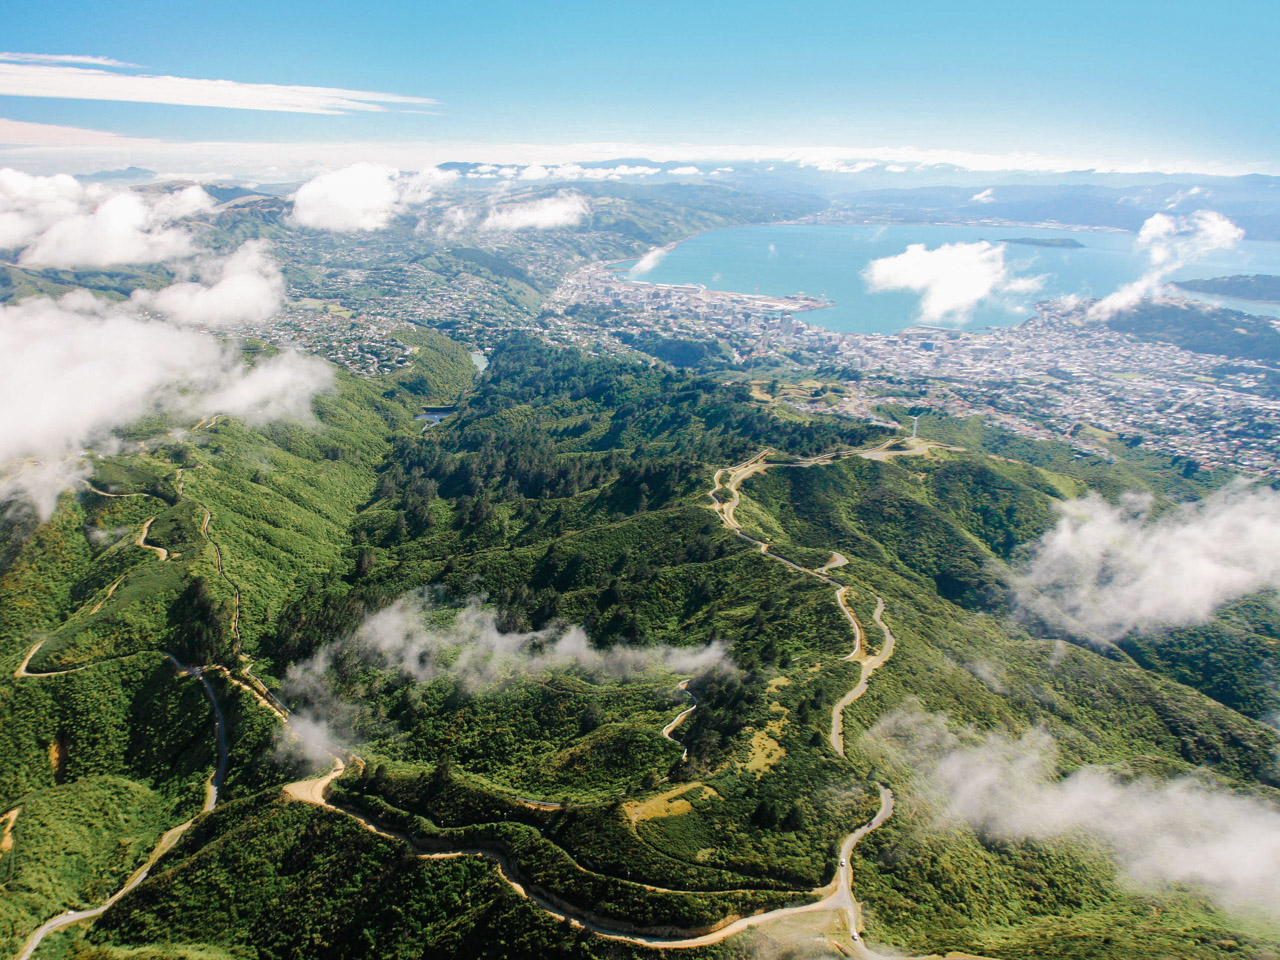 Zealandia in the foreground and the City of Wellington in the background